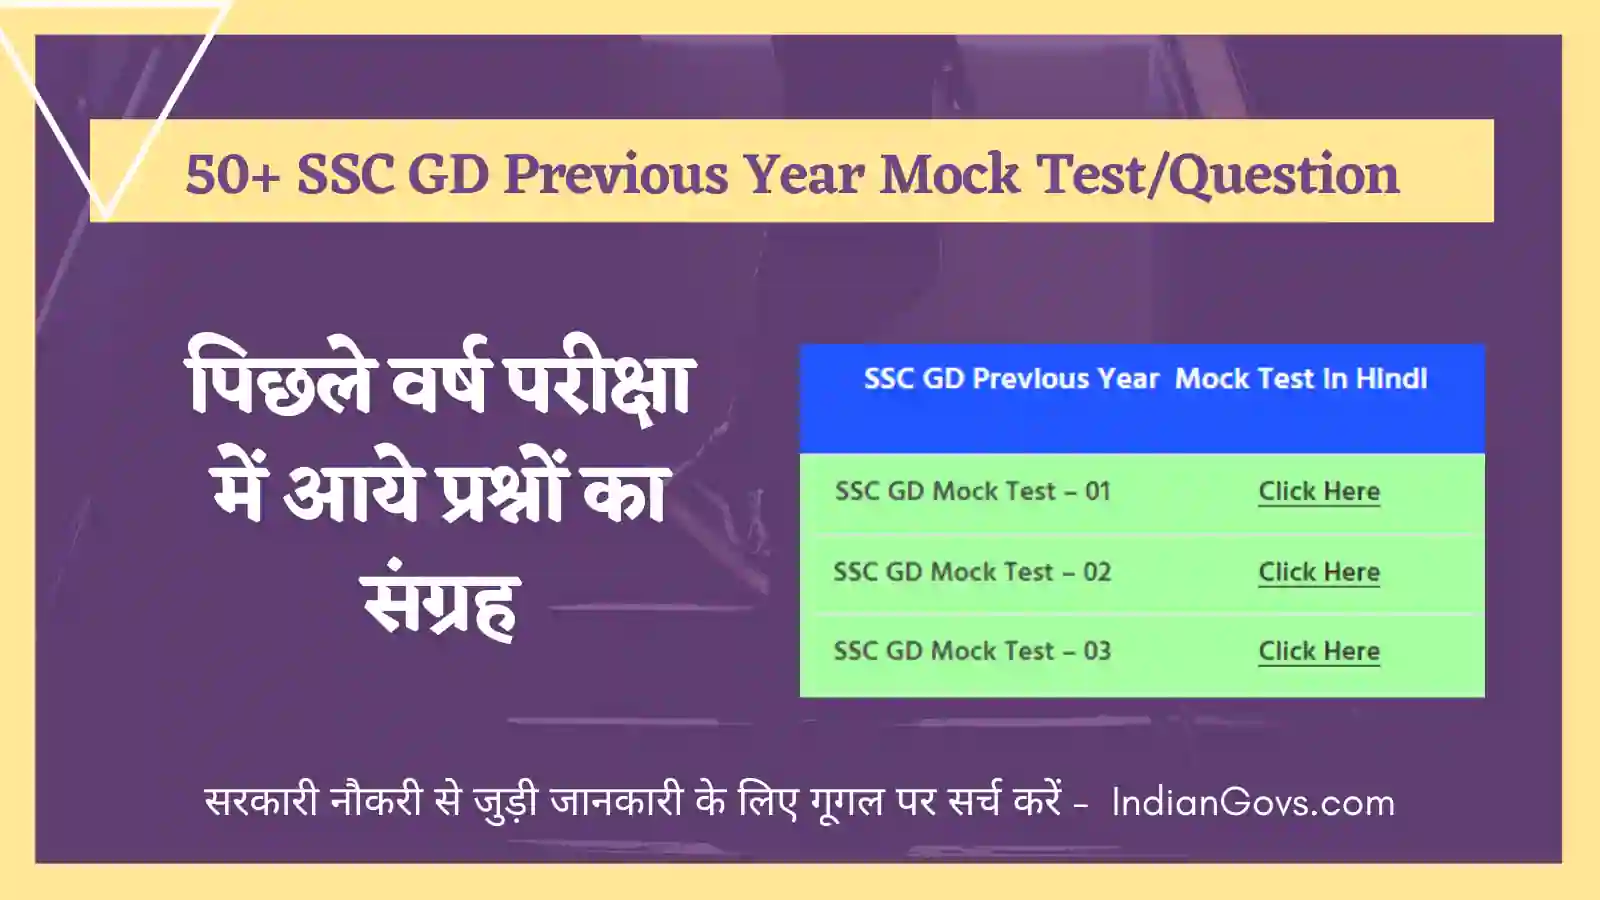 SSC GD Previous Year Mock Test Question in Hindi